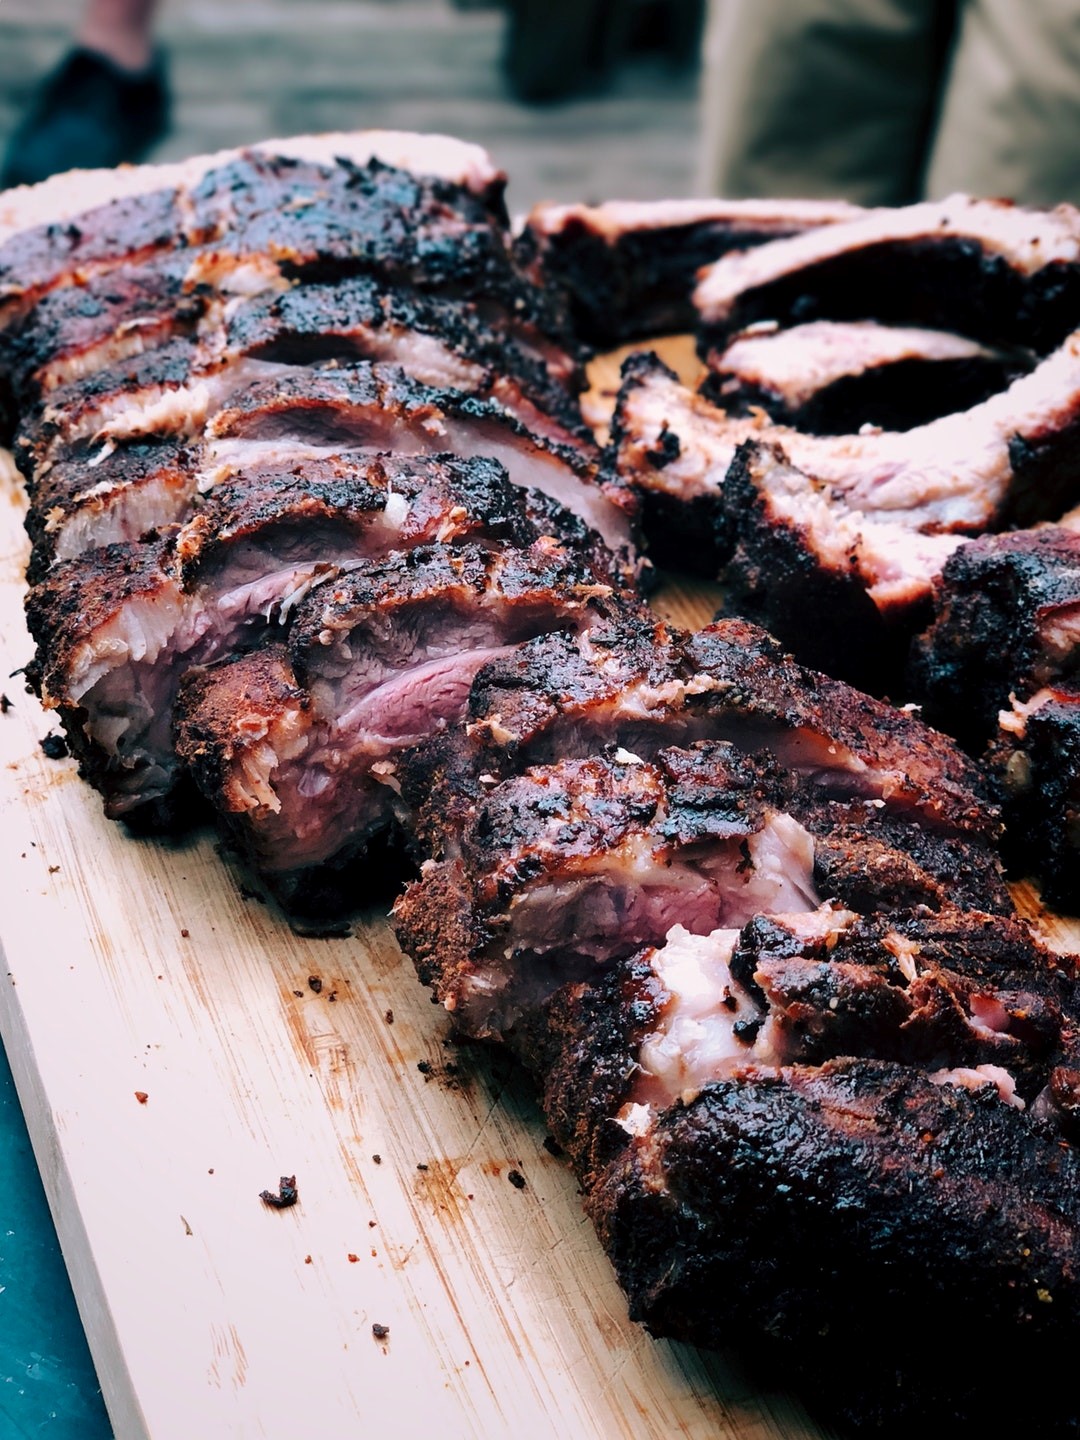 5 Essential Tips for Smoking Meat